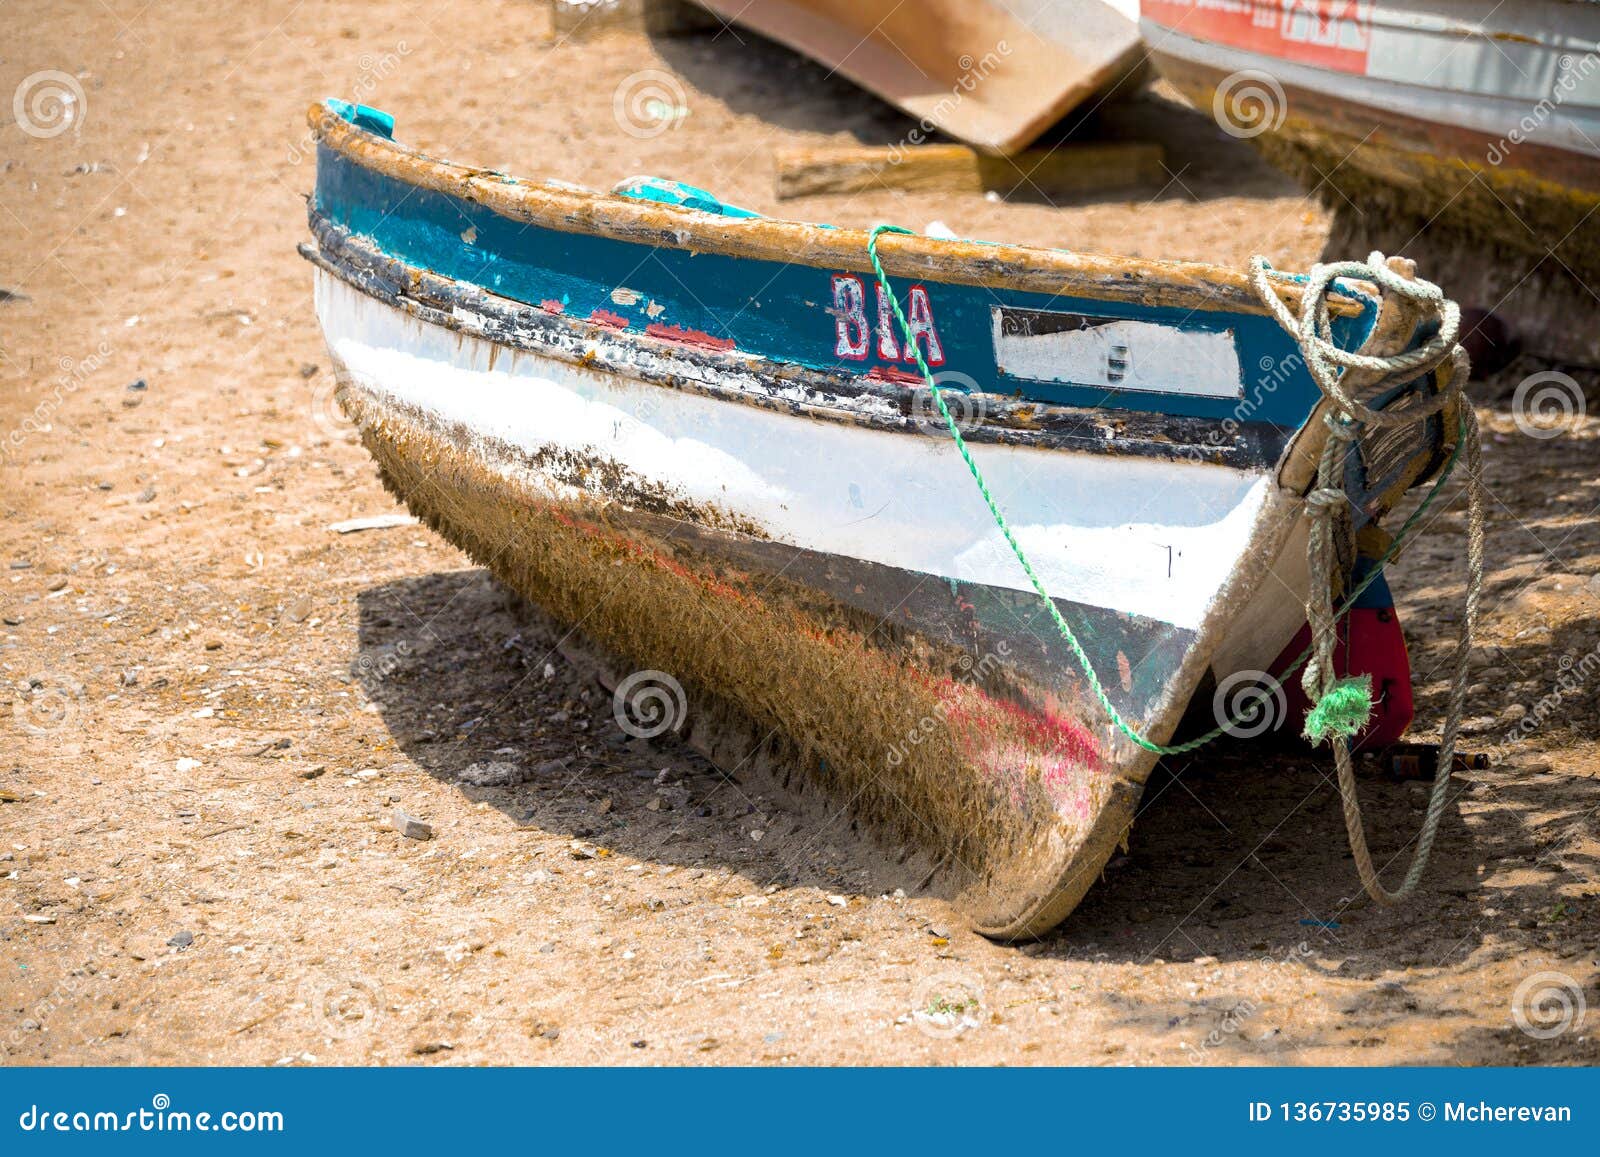 Old Fishing Boat on the Shore. Boat with Nets Waiting for